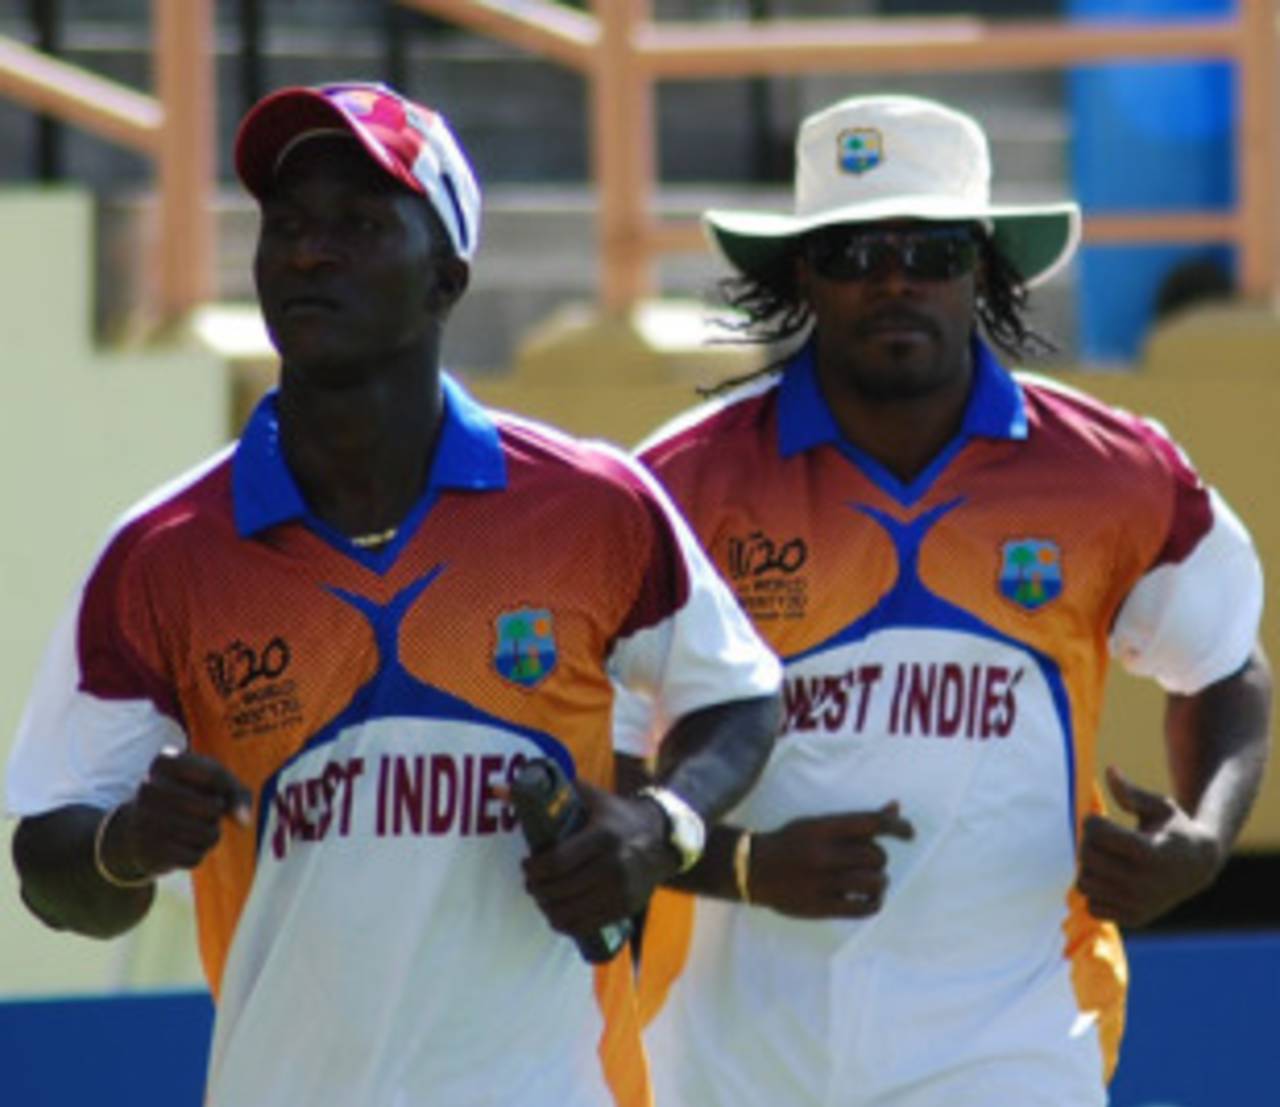 A change of guard in West Indies cricket - Darren Sammy takes over from Chris Gayle&nbsp;&nbsp;&bull;&nbsp;&nbsp;West Indies Cricket Board